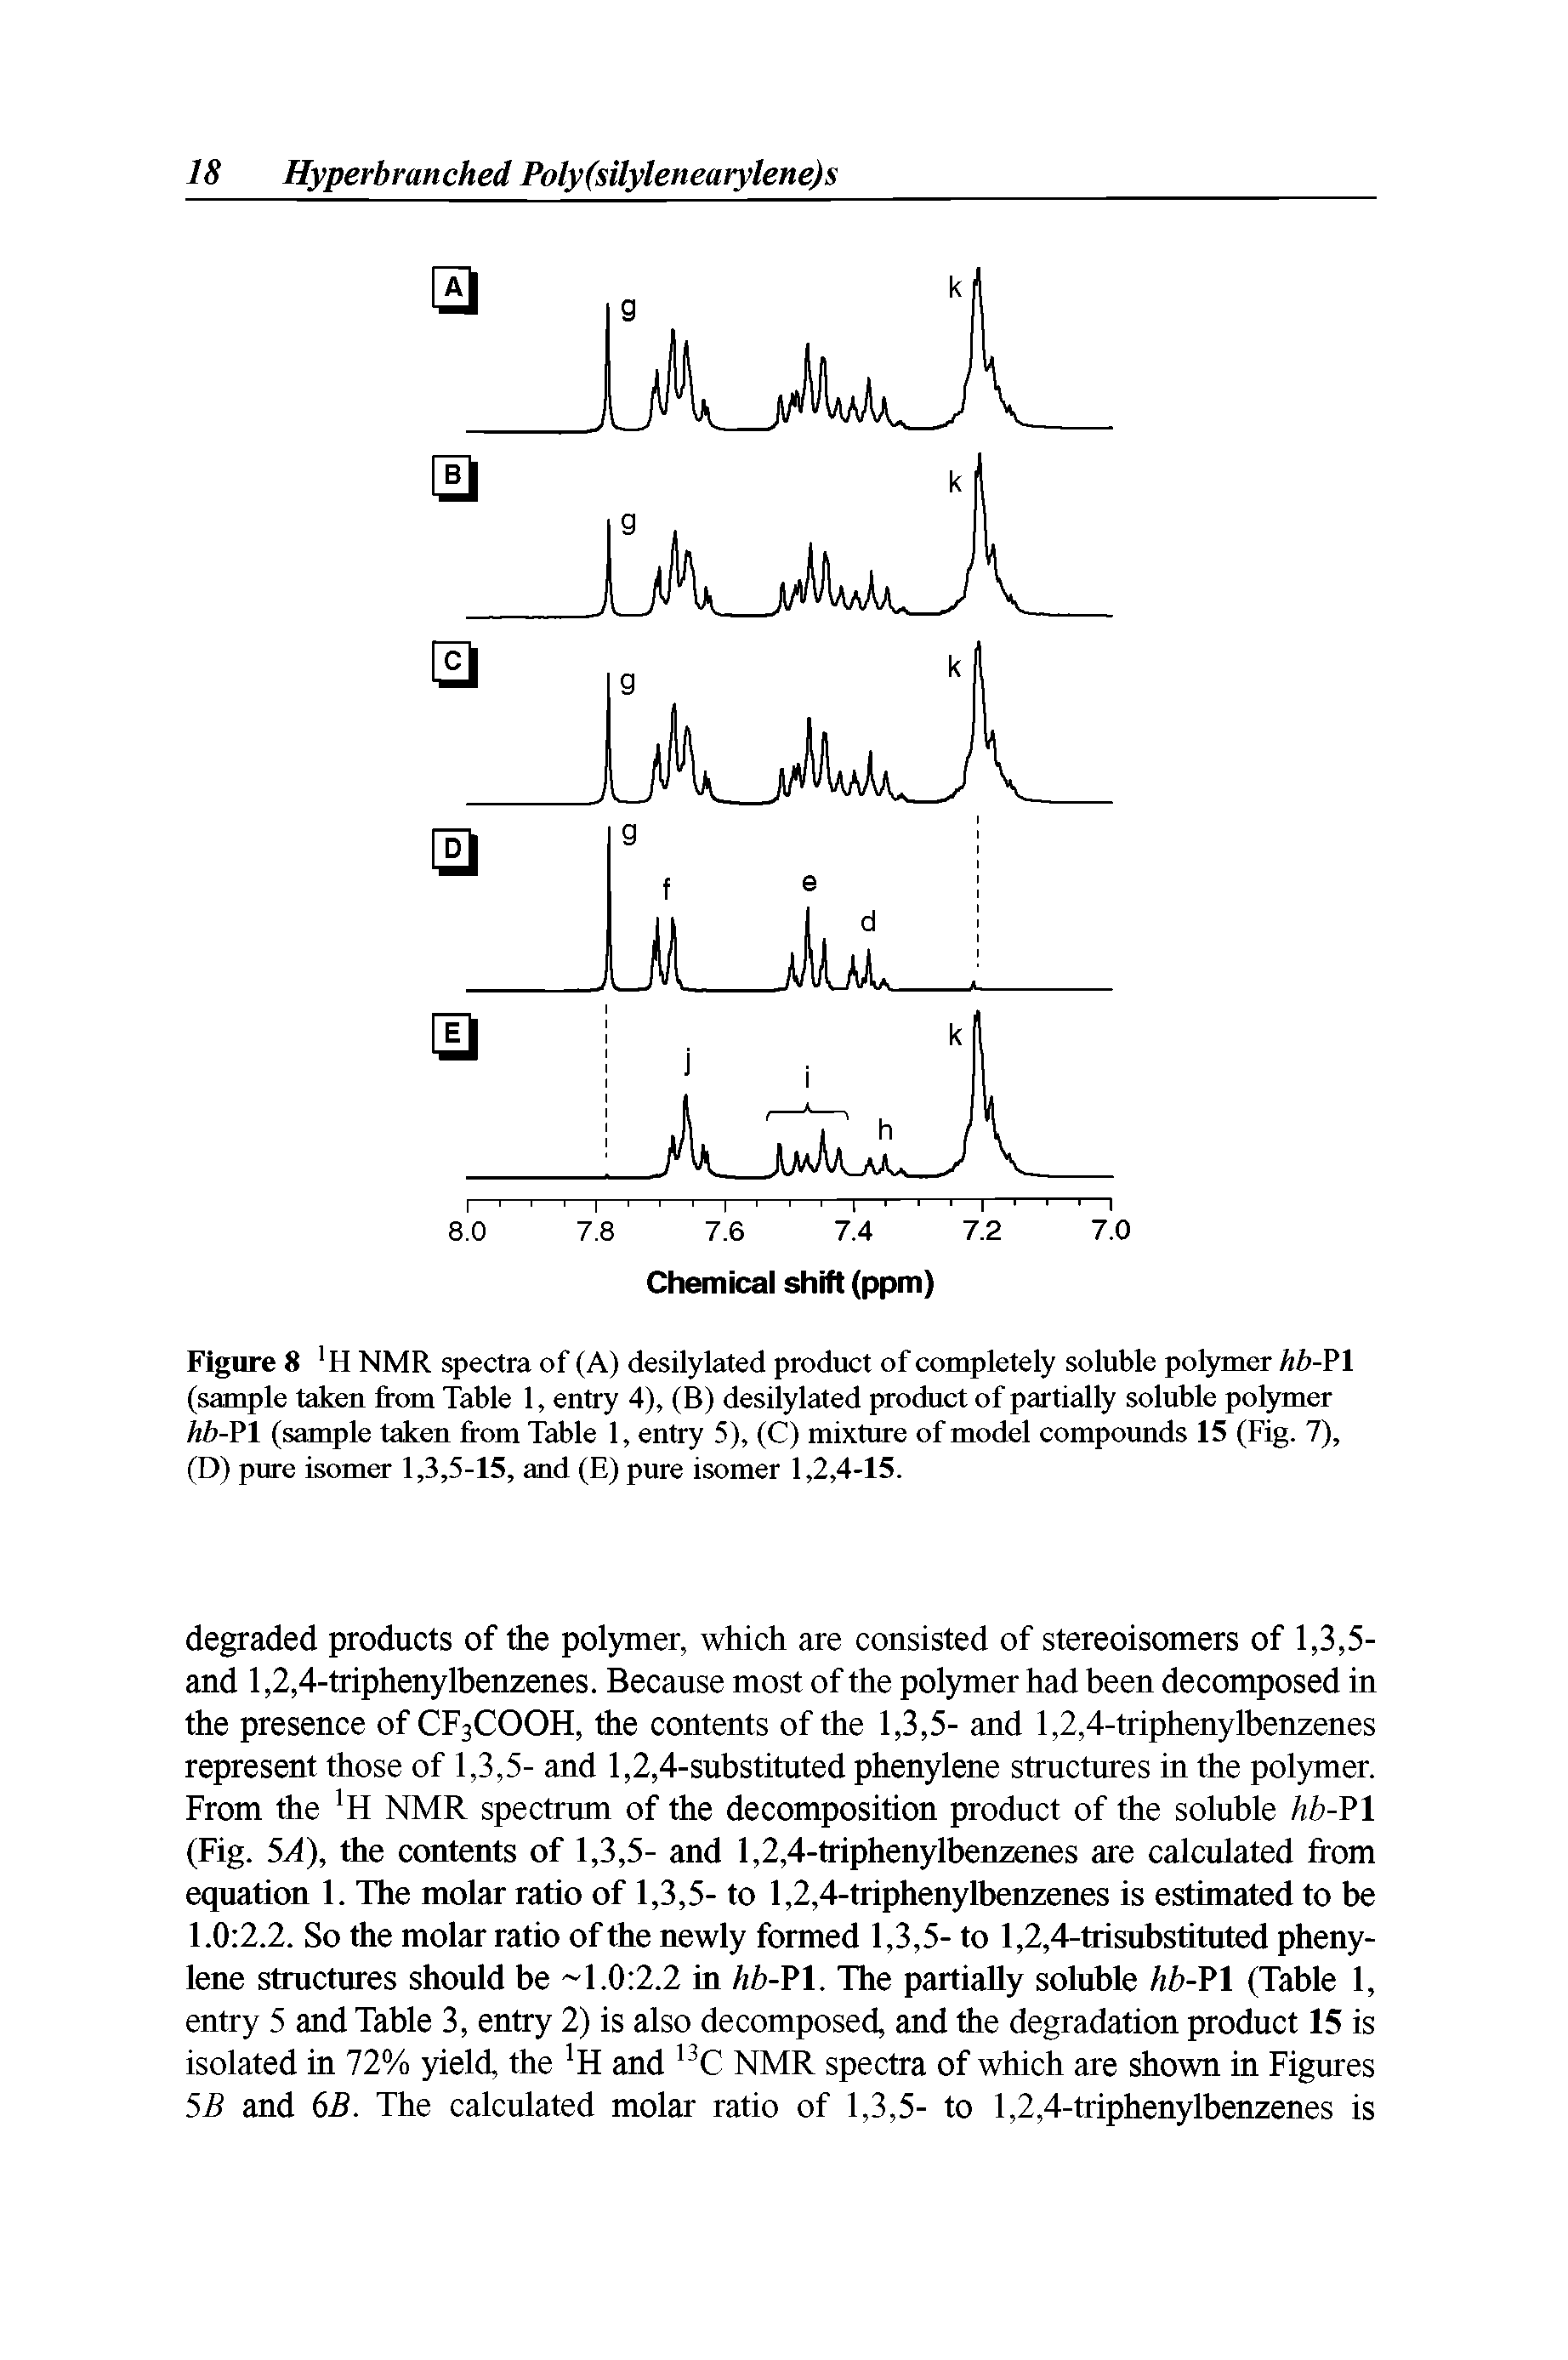 Figure 8 H NMR spectra of (A) desilylated product of completely soluble polymer hb-Pl (sample taken from Table 1, entry 4), (B) desilylated product of partially soluble polymer hb-Pl (sample taken from Table 1, entry 5), (C) mixture of model compounds 15 (Fig. 7), (D) pure isomer 1,3,5-15, and (E) pure isomer 1,2,4-15.